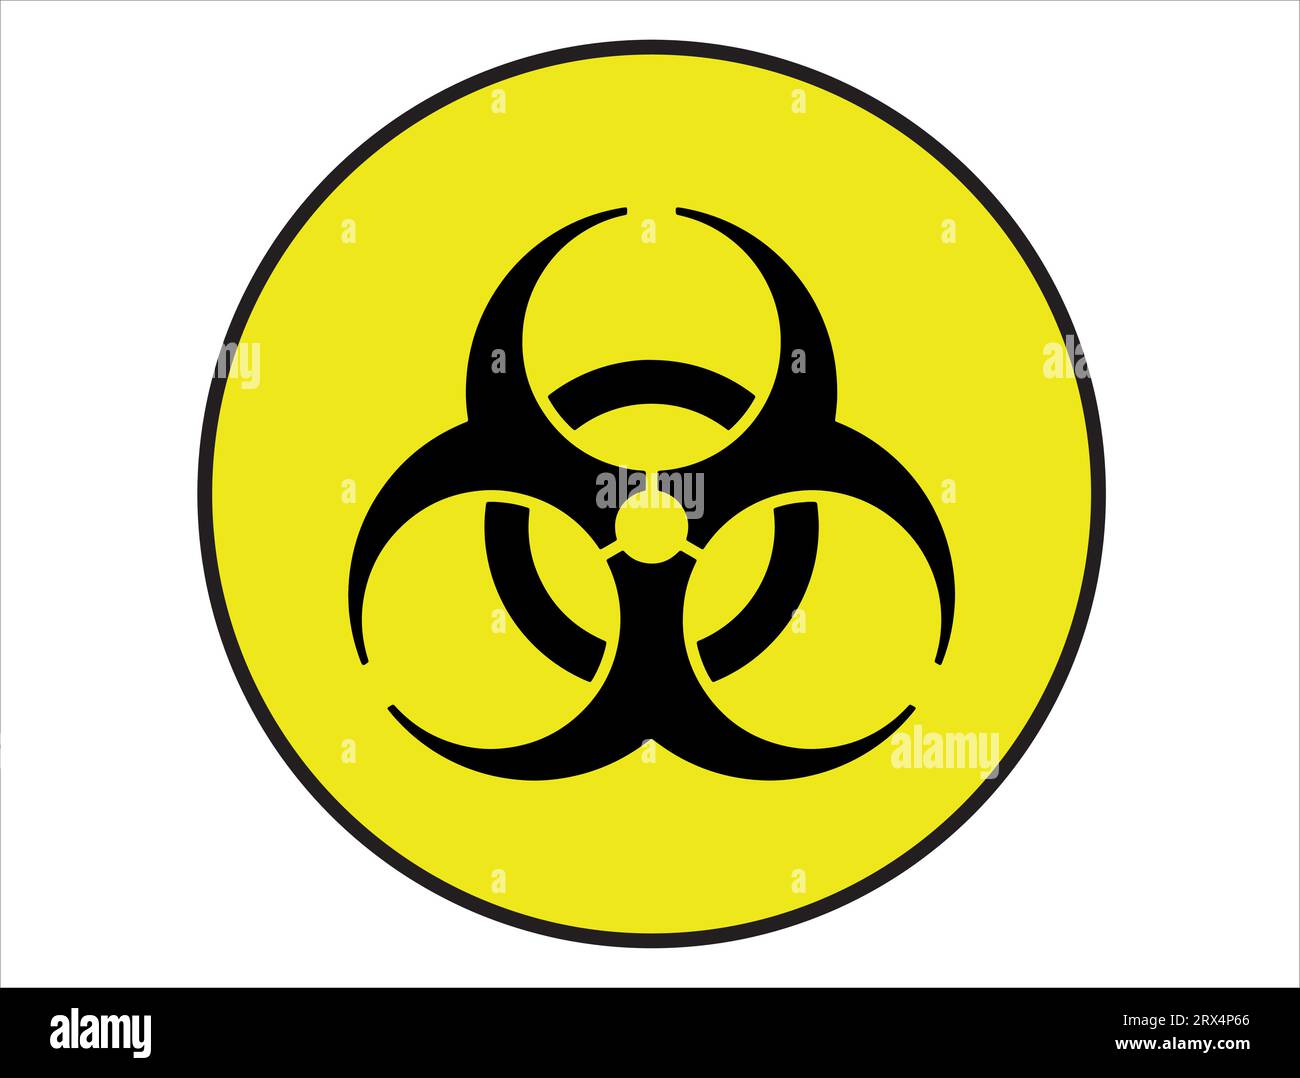 66,407 Radiation Protection Images, Stock Photos, 3D objects, & Vectors